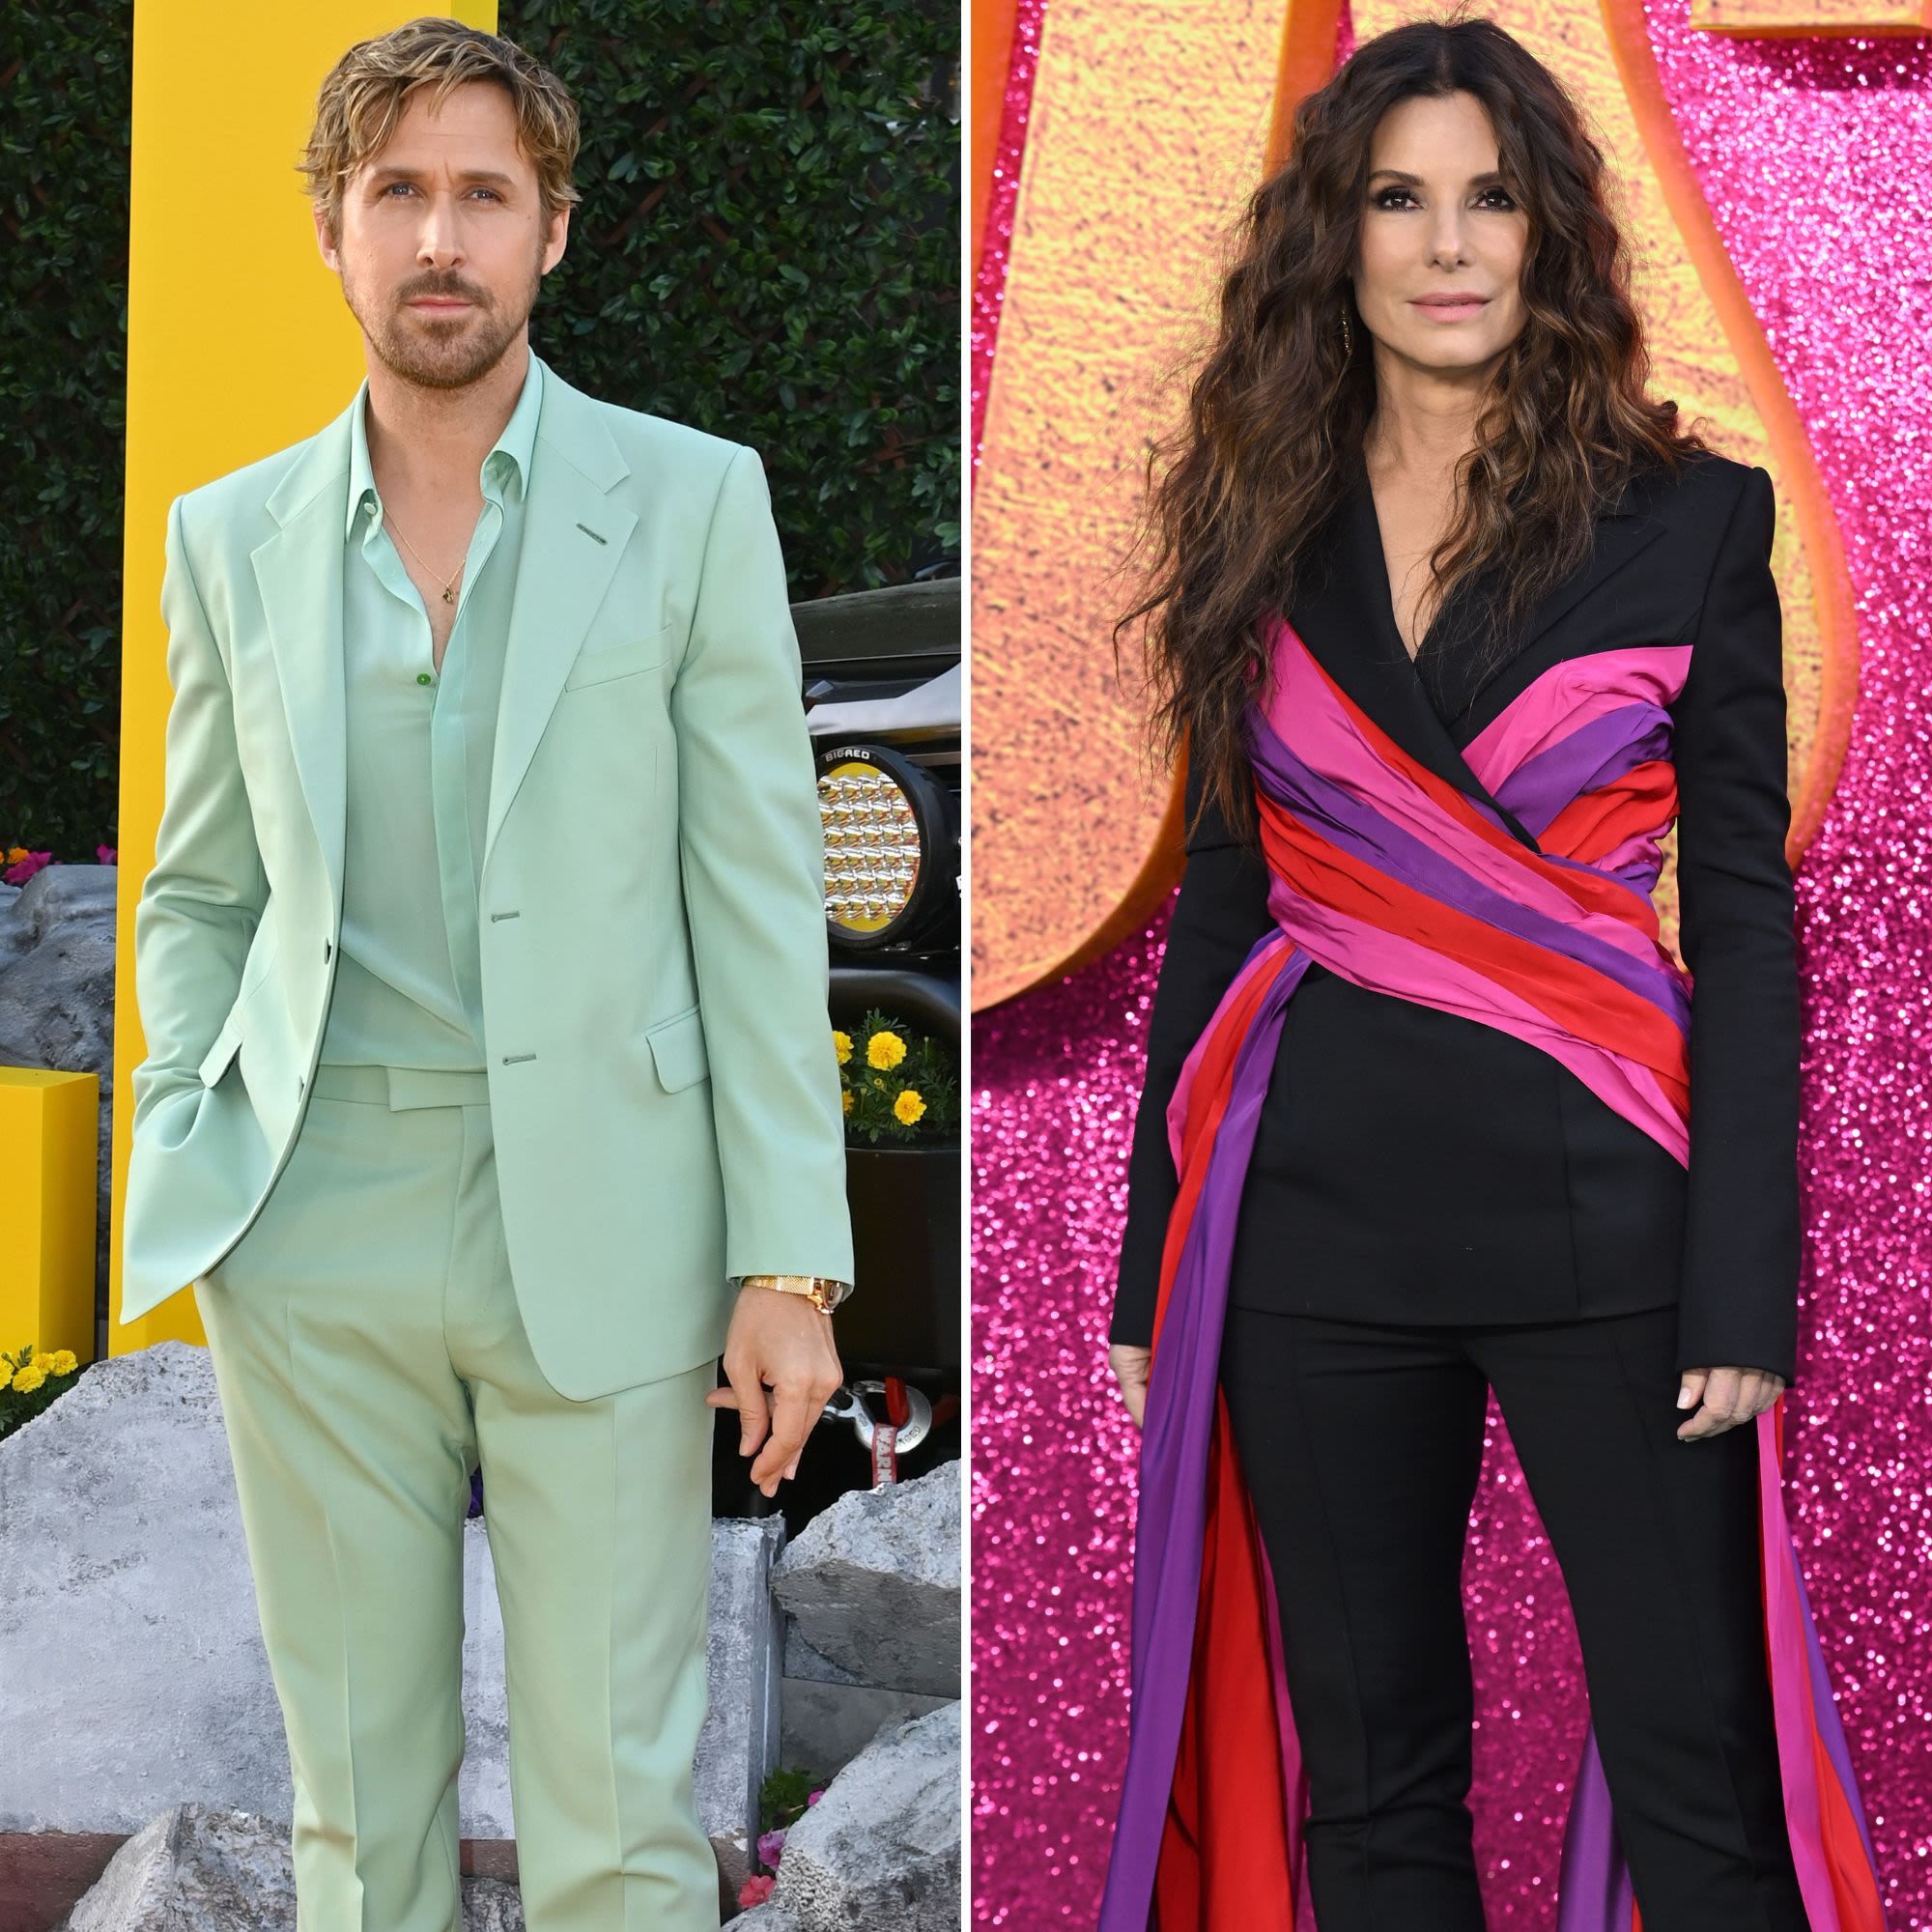 Ryan Gosling Has ‘Nothing but Love’ for Ex Sandra Bullock During Her ‘Tough Few Years’